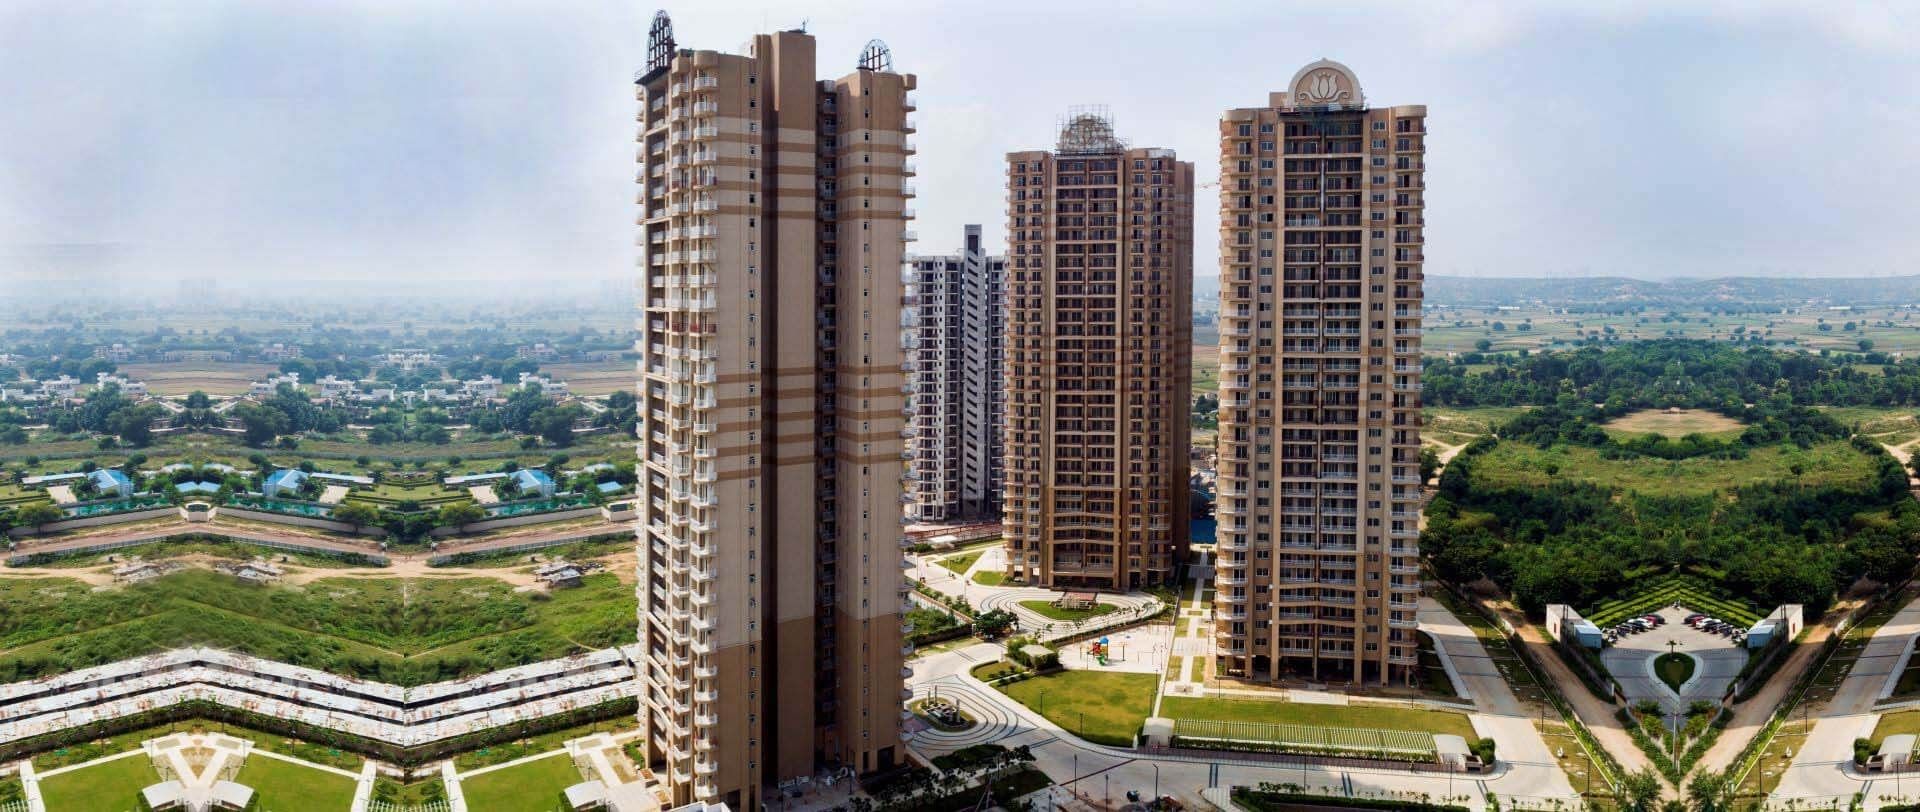 Ready to Move Flats in Gurgaon for Sale - AIPL